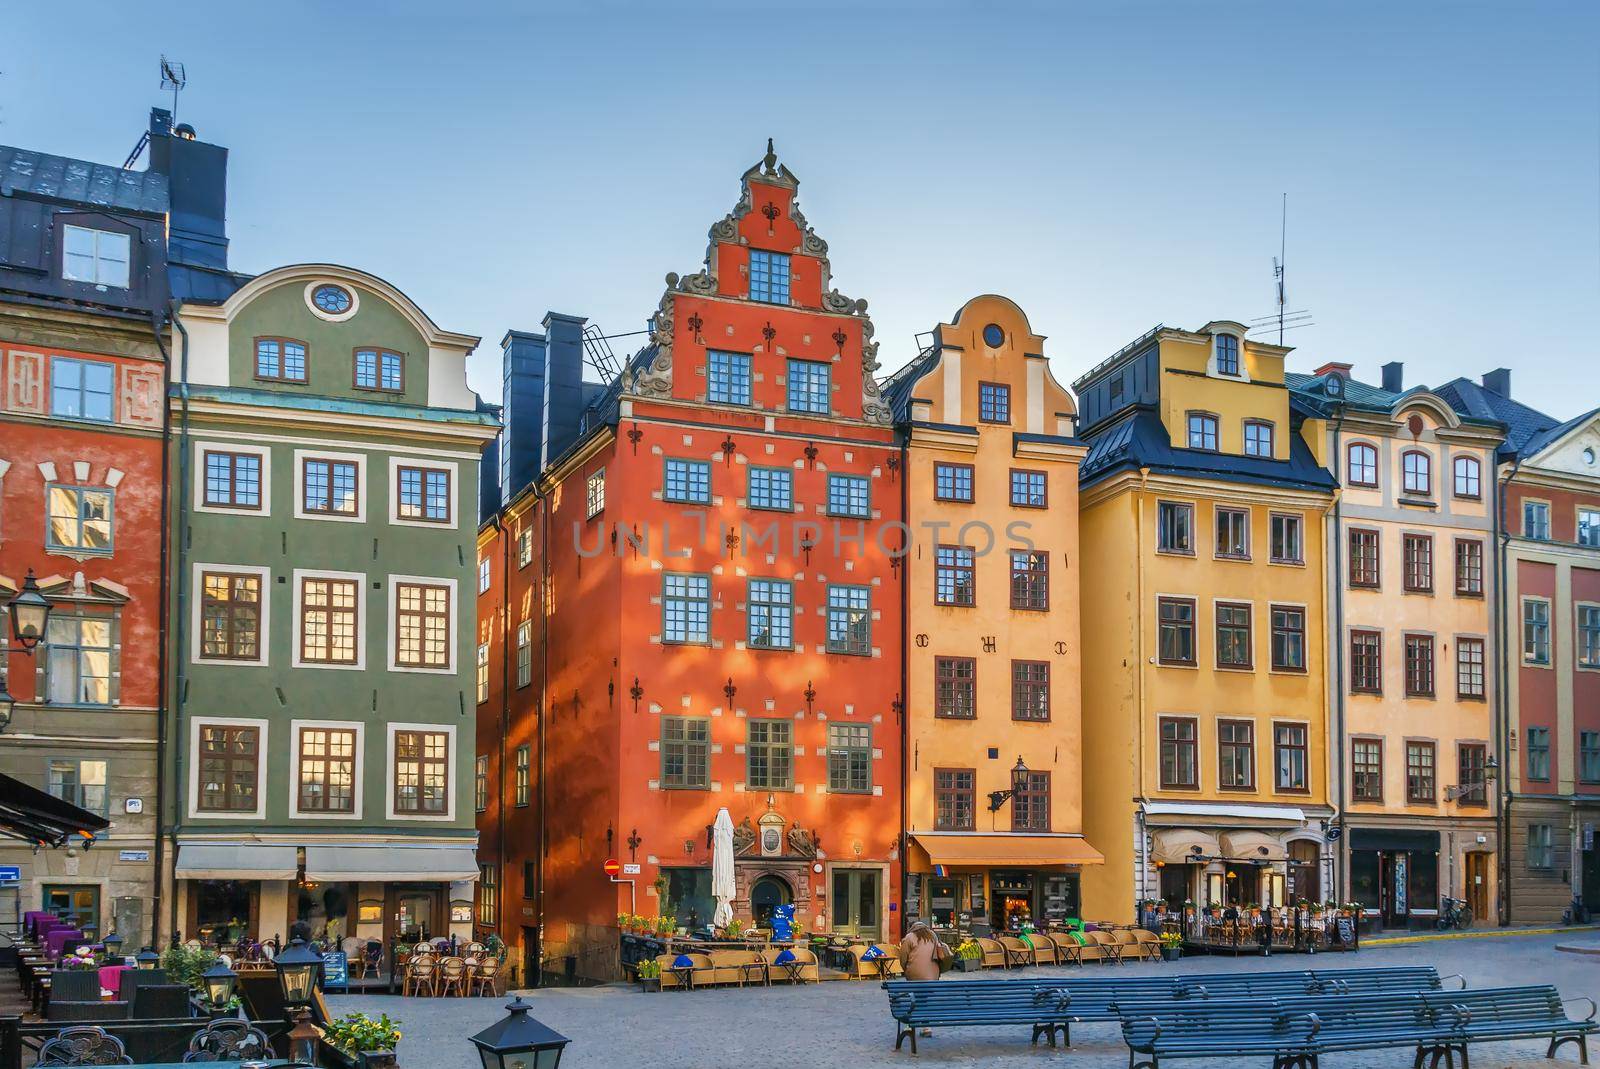 Stortorget is a small public square in Gamla Stan, the old town in central Stockholm, Sweden